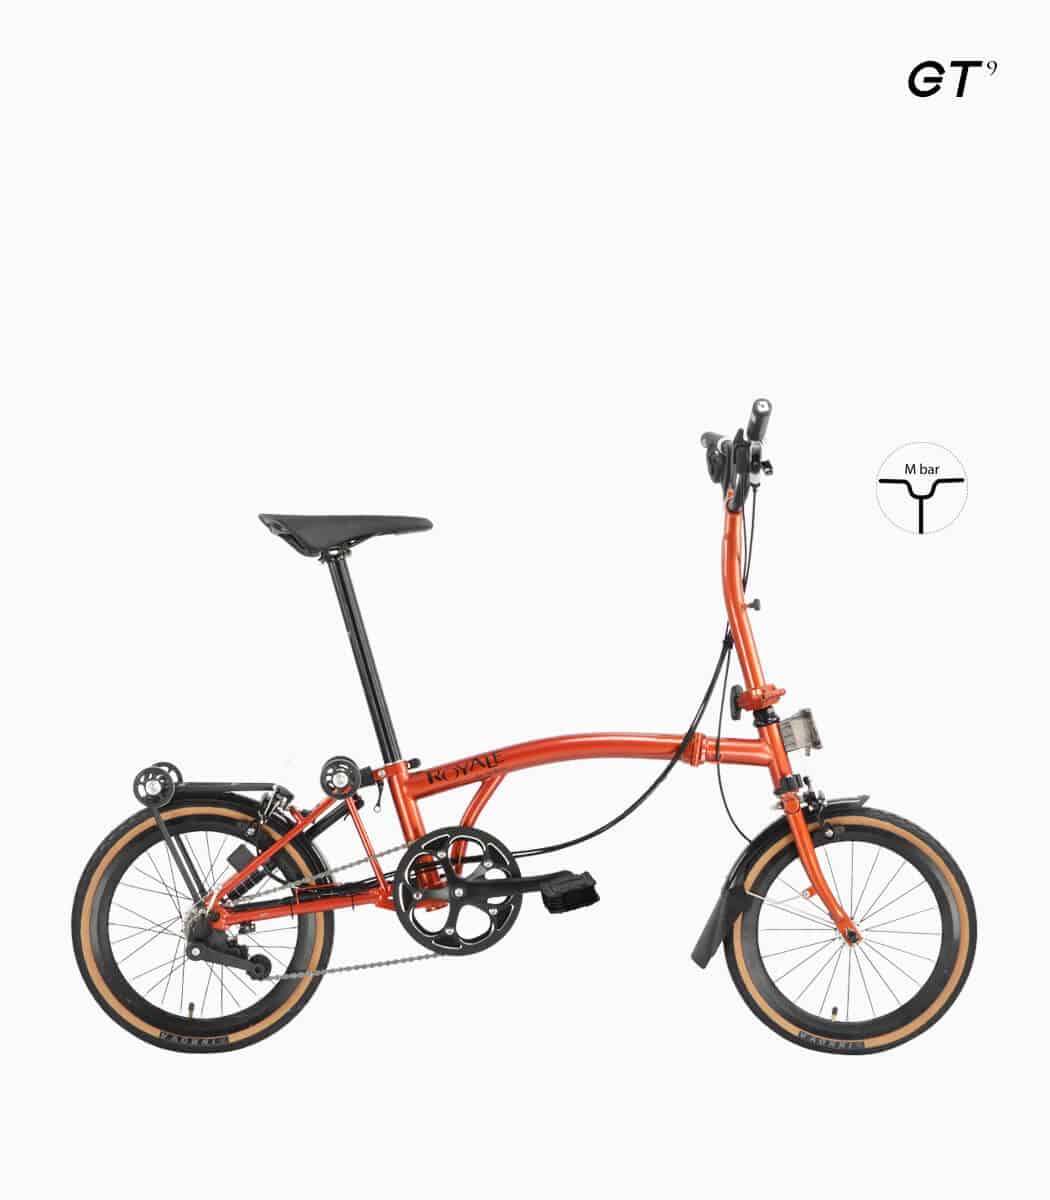 MOBOT ROYALE GT M9 (FIERY ORANGE) foldable bicycle M-bar wtih tanwall tyres high profile rim right